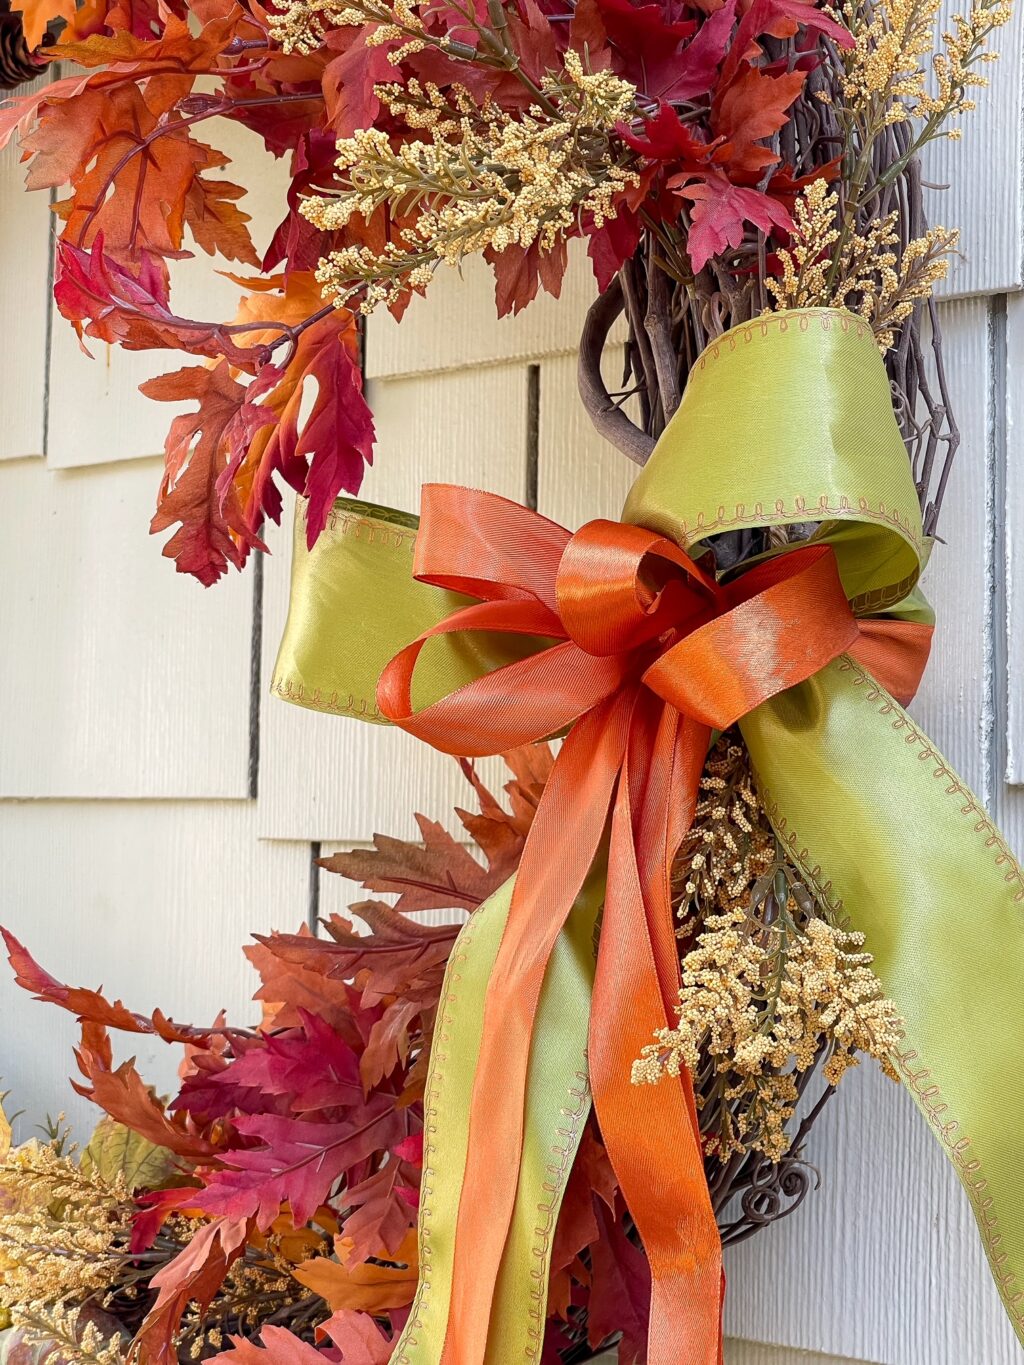 Green ribbon with smaller ribbon of orange in the middle on a grapevine wreath.